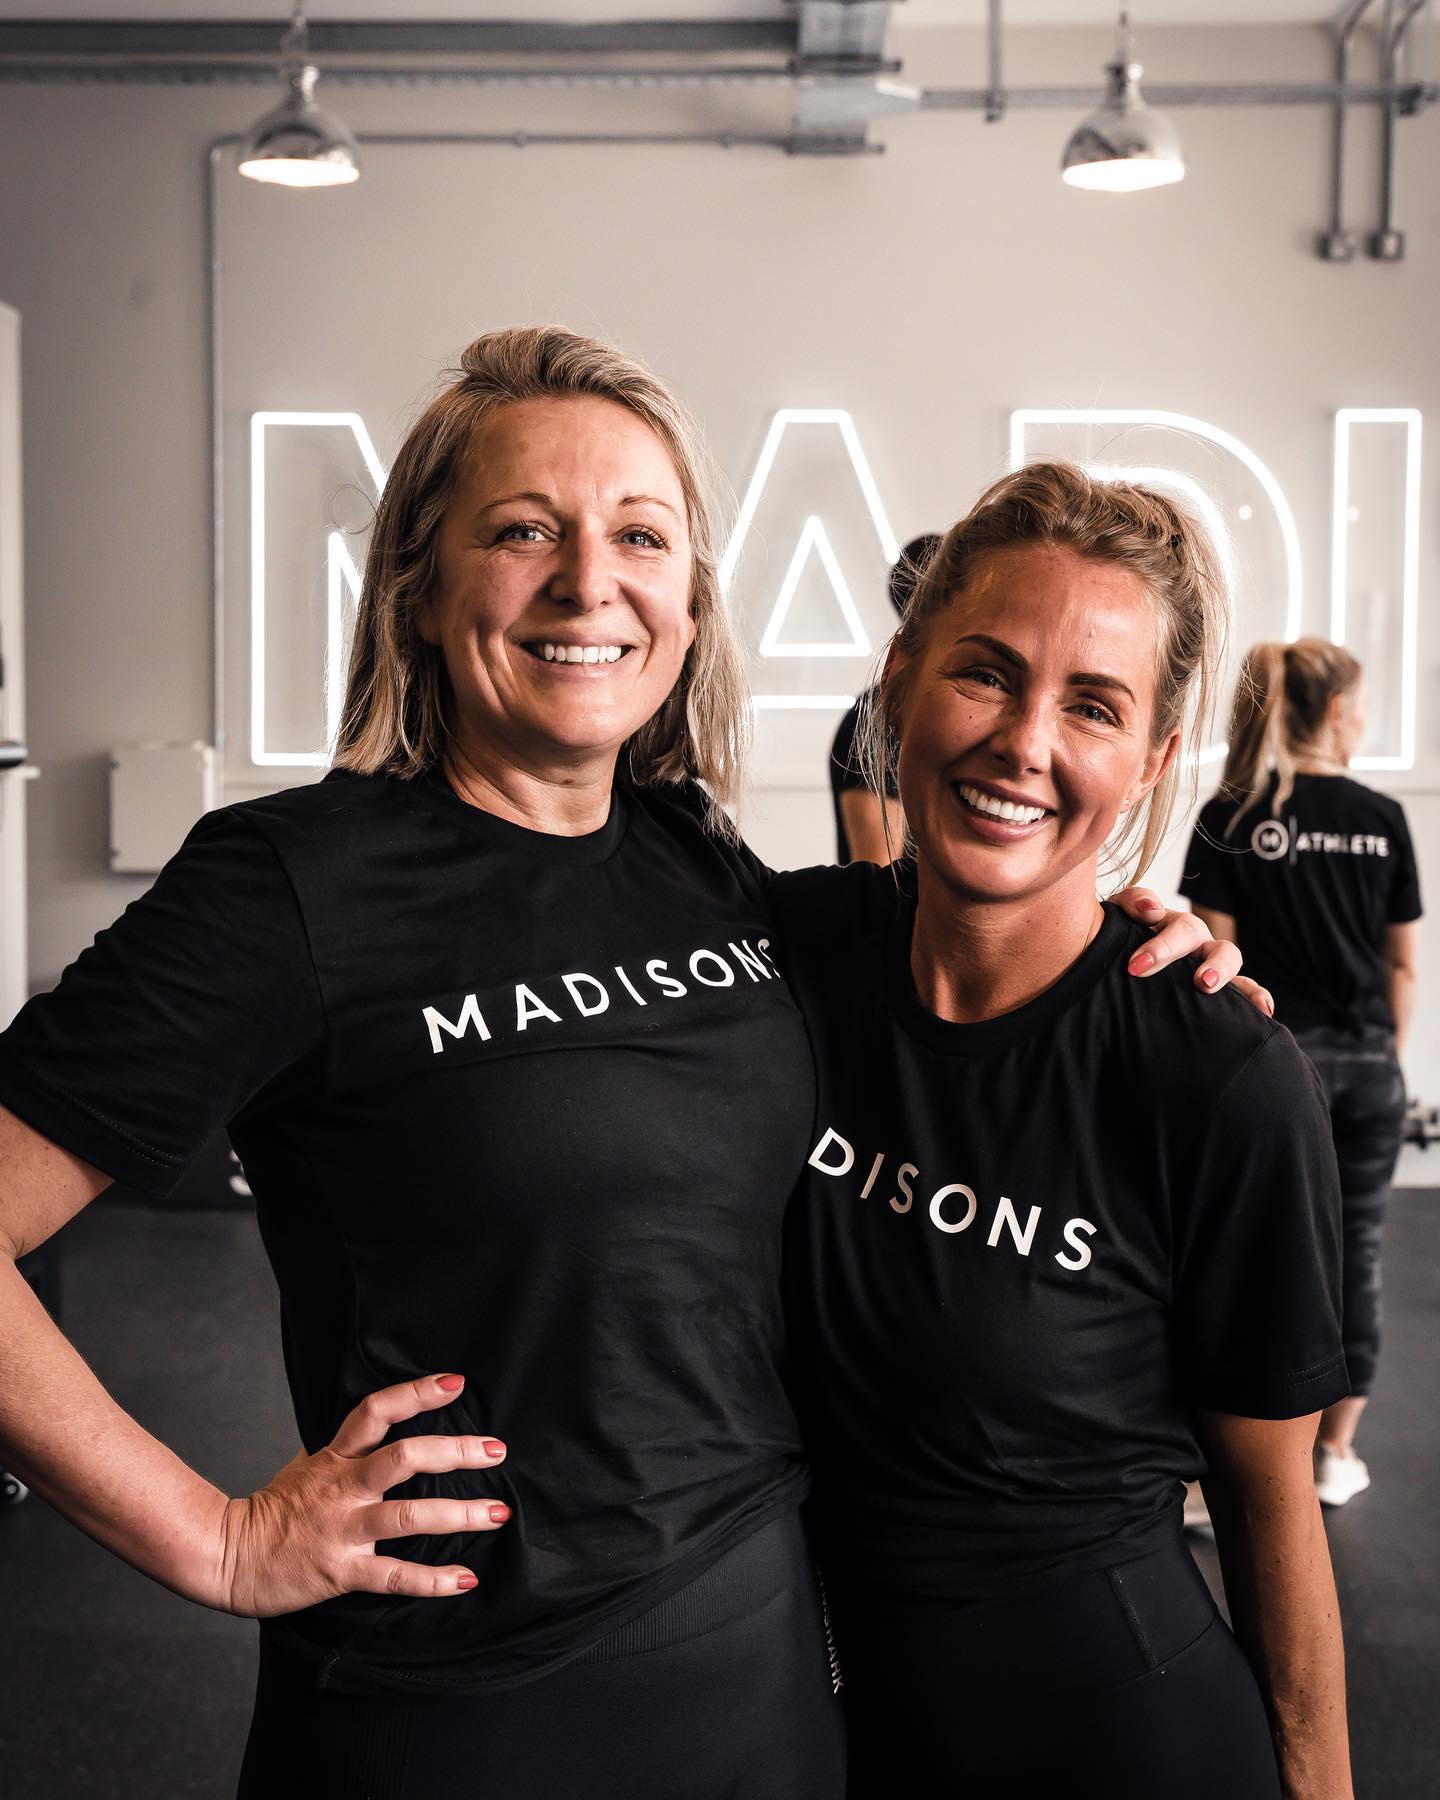 Two people wearing black t-shirts with a Madisons logo looking at the camera and smiling.